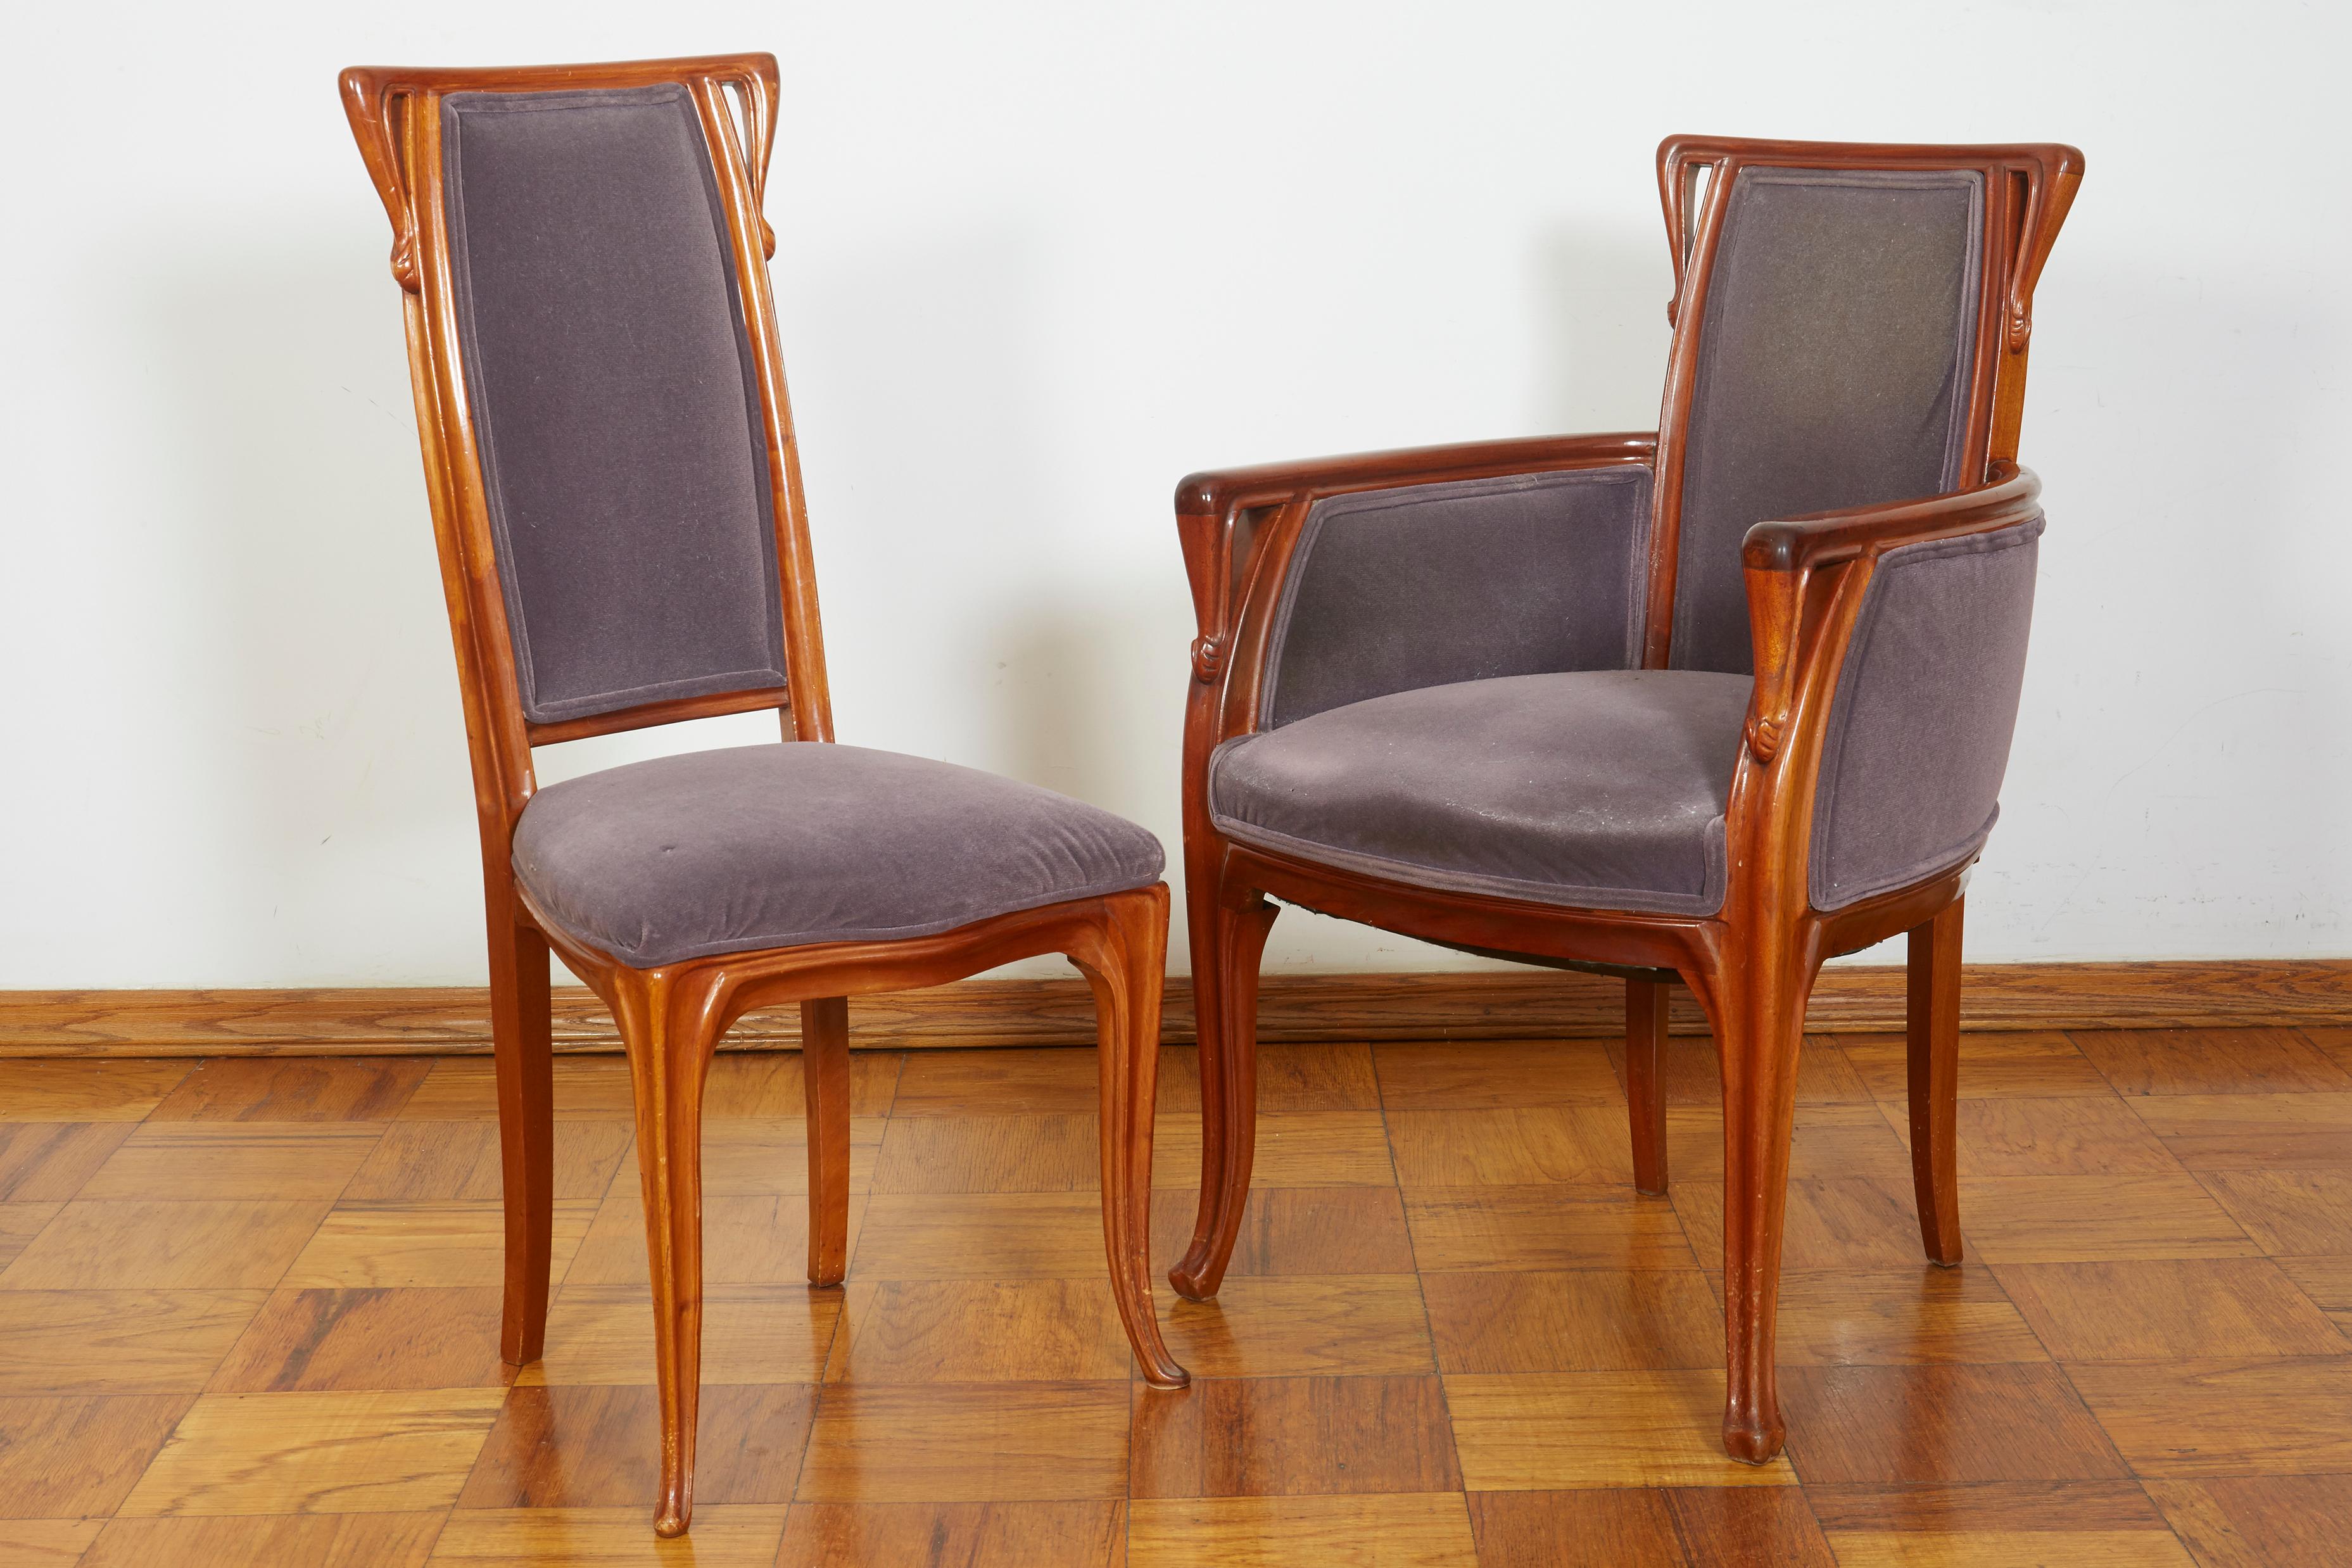 French Art Nouveau Chairs by Louis Majorelle For Sale 1